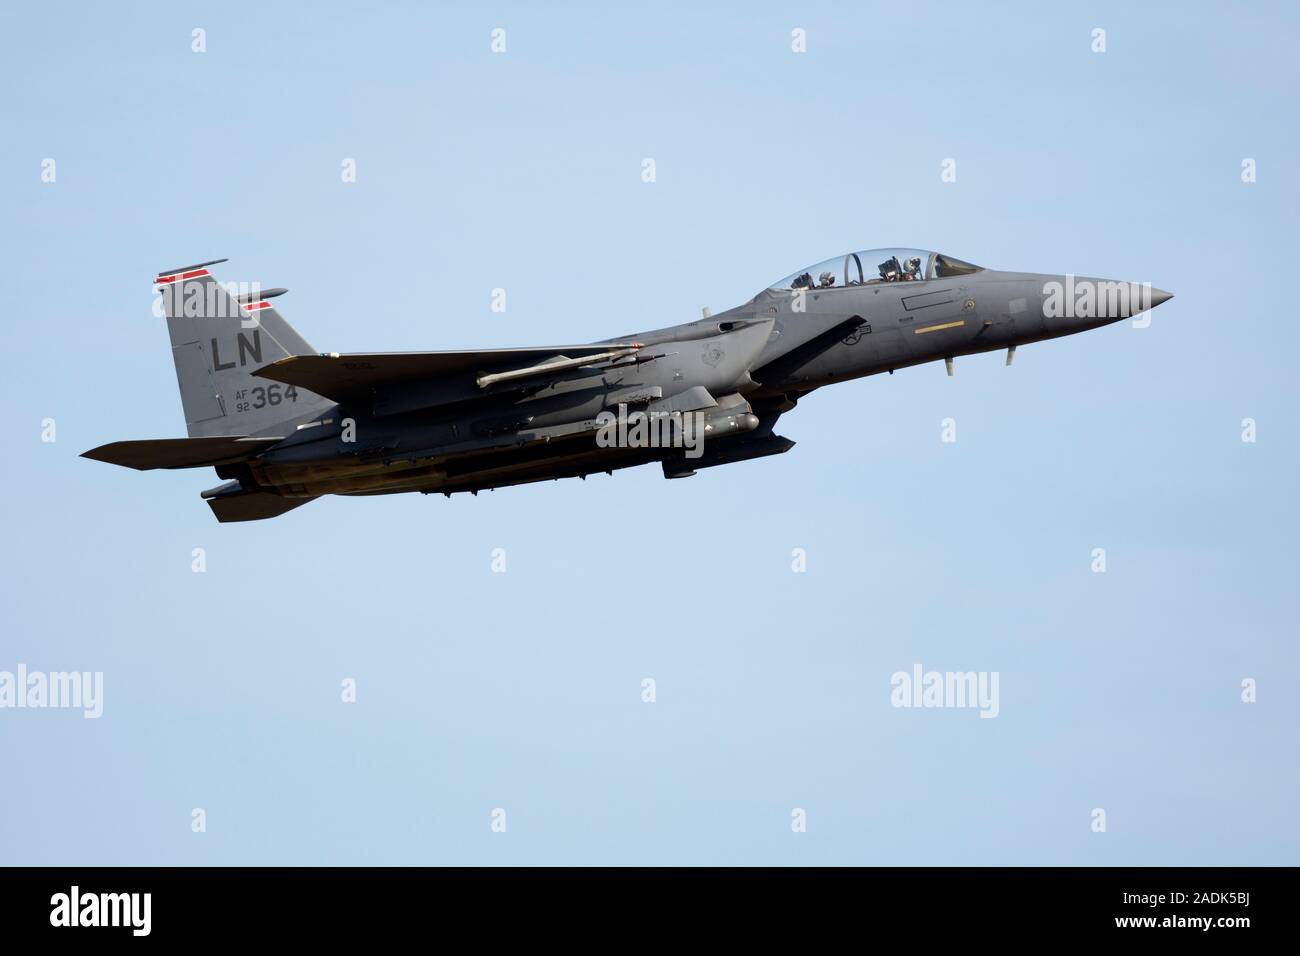 McDonnell Douglas F-15E Strike Eagle, 92-0364 coded LN of the 48th Fighter Wing, 494 Fighter Squadron, USAFE, based and seen at RAF Lakenheath Stock Photo